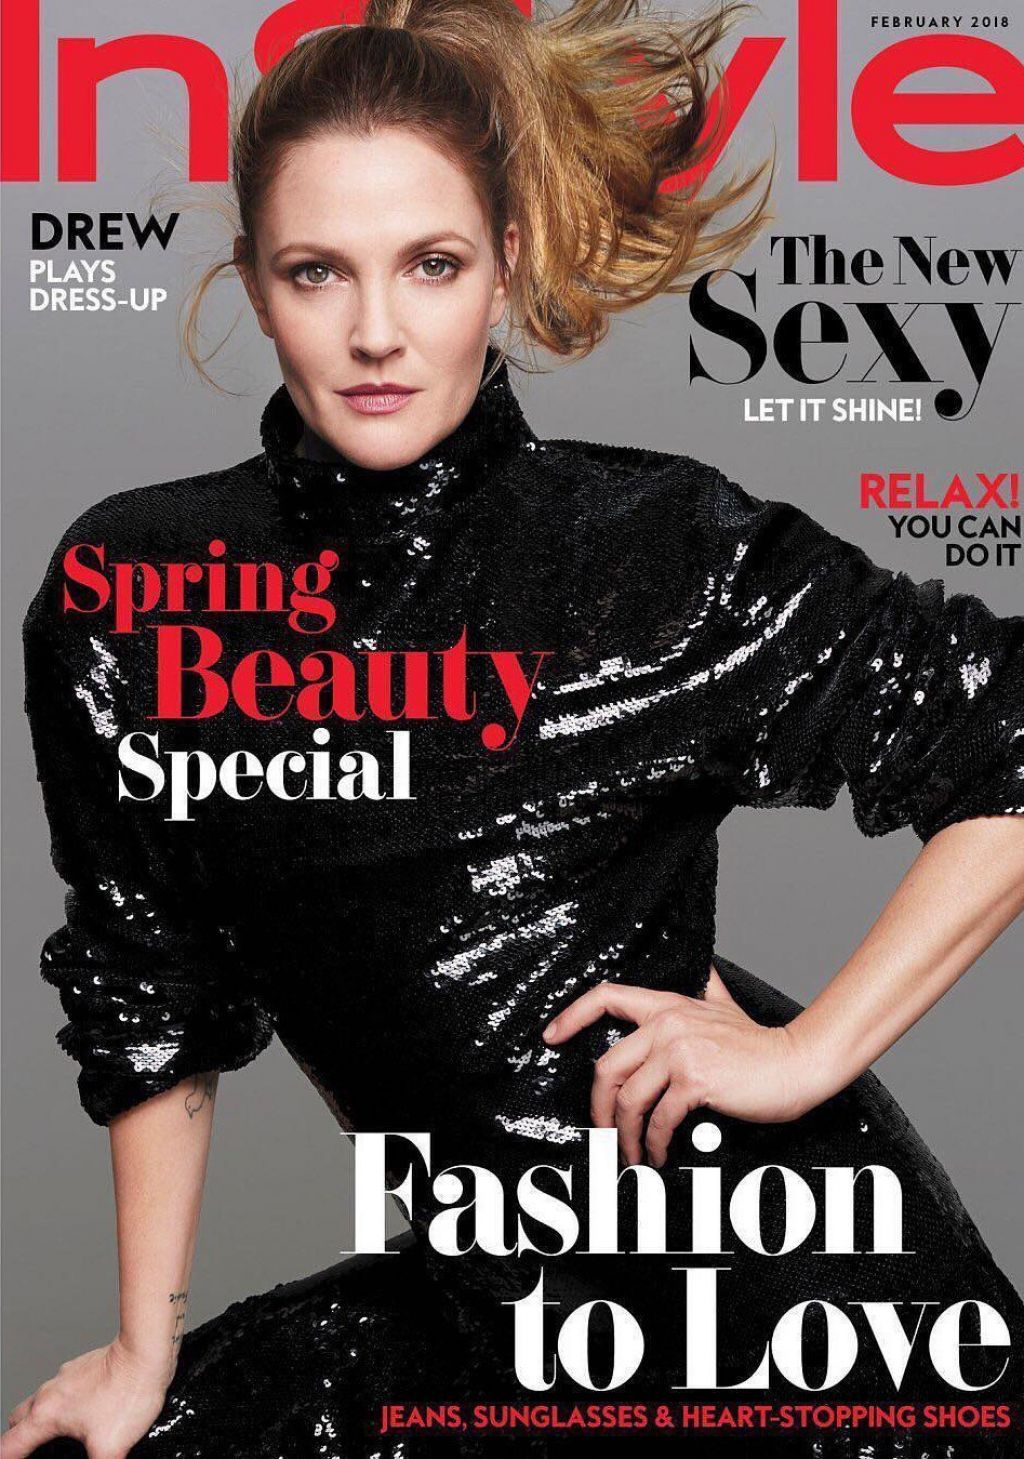 Drew Barrymore for InStyle February 2018